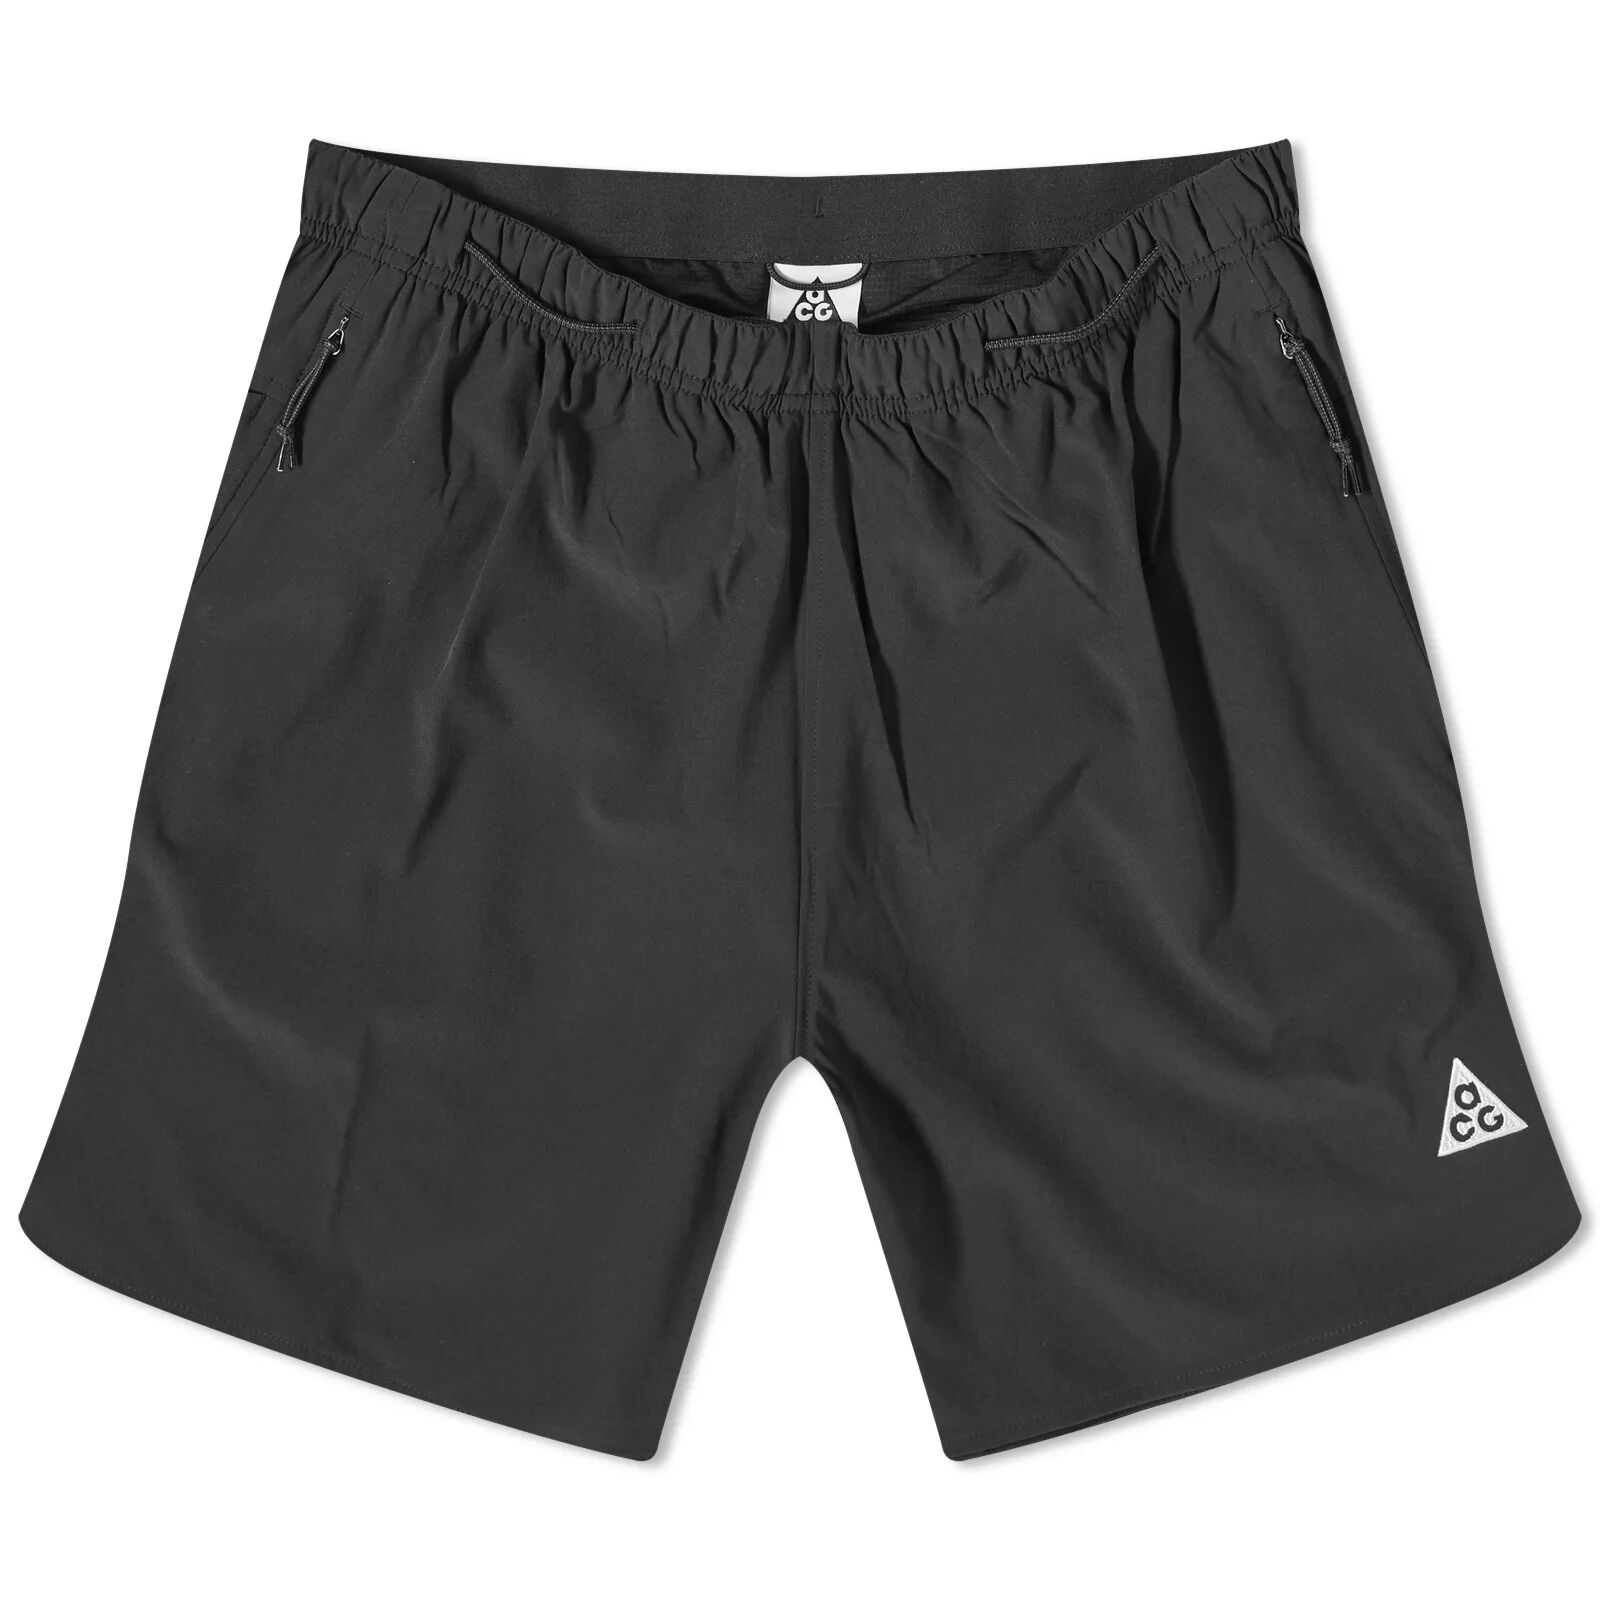 Nike Men's ACG Sands Shorts in Black/Summit White, Size Small